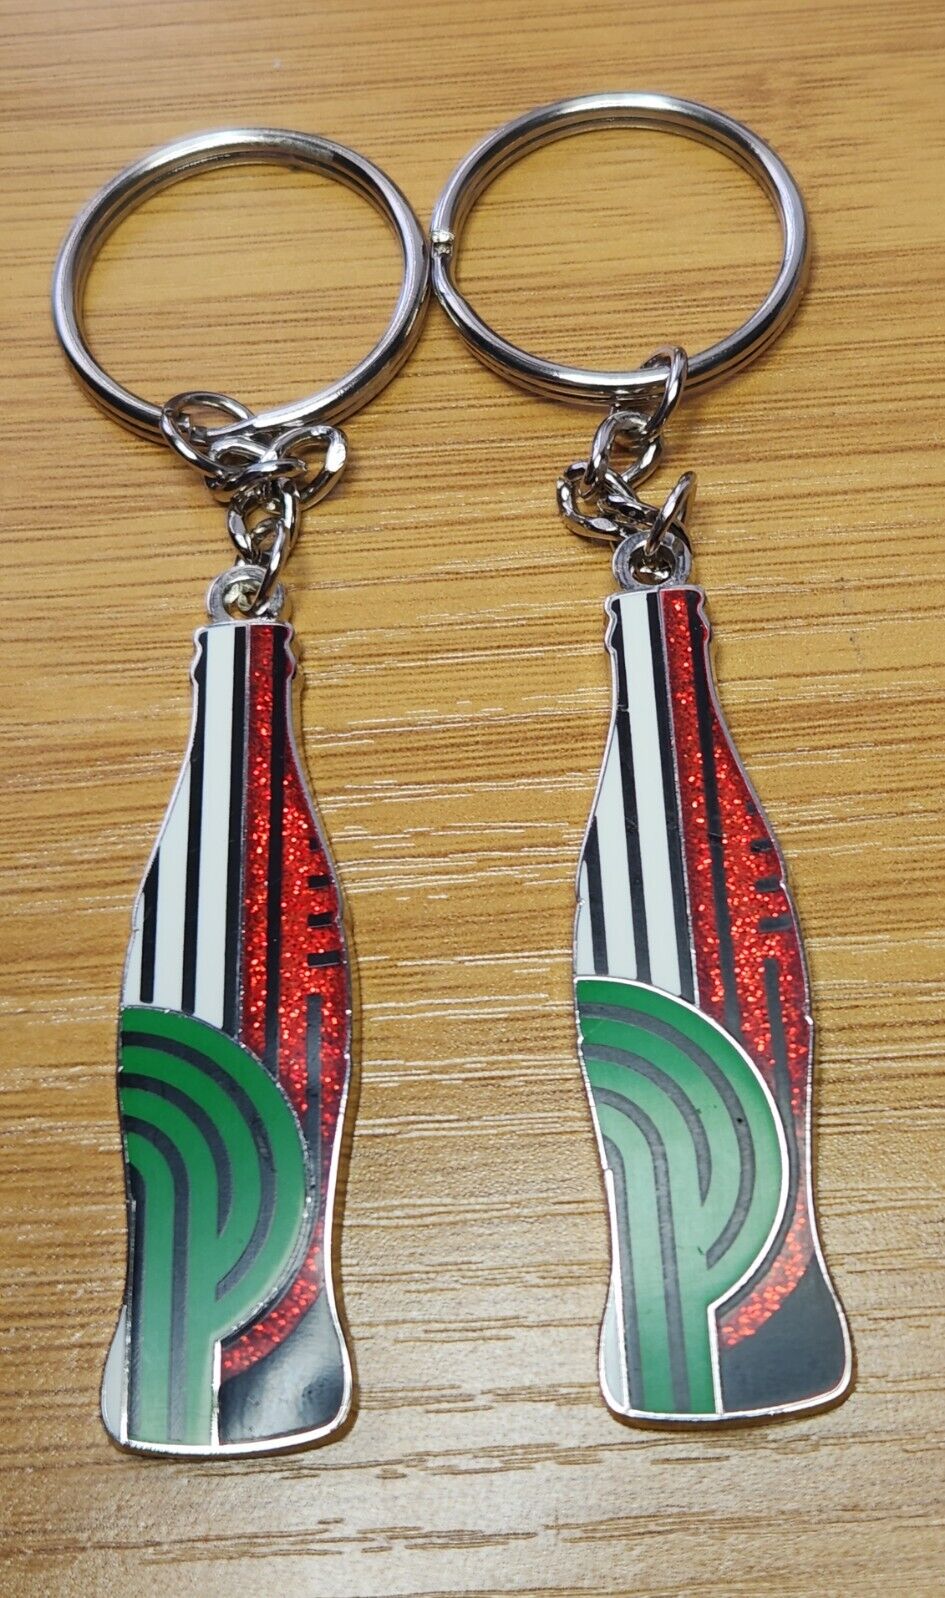 2 Coca Cola Mexico Bottle-shaped Key Rings Chains